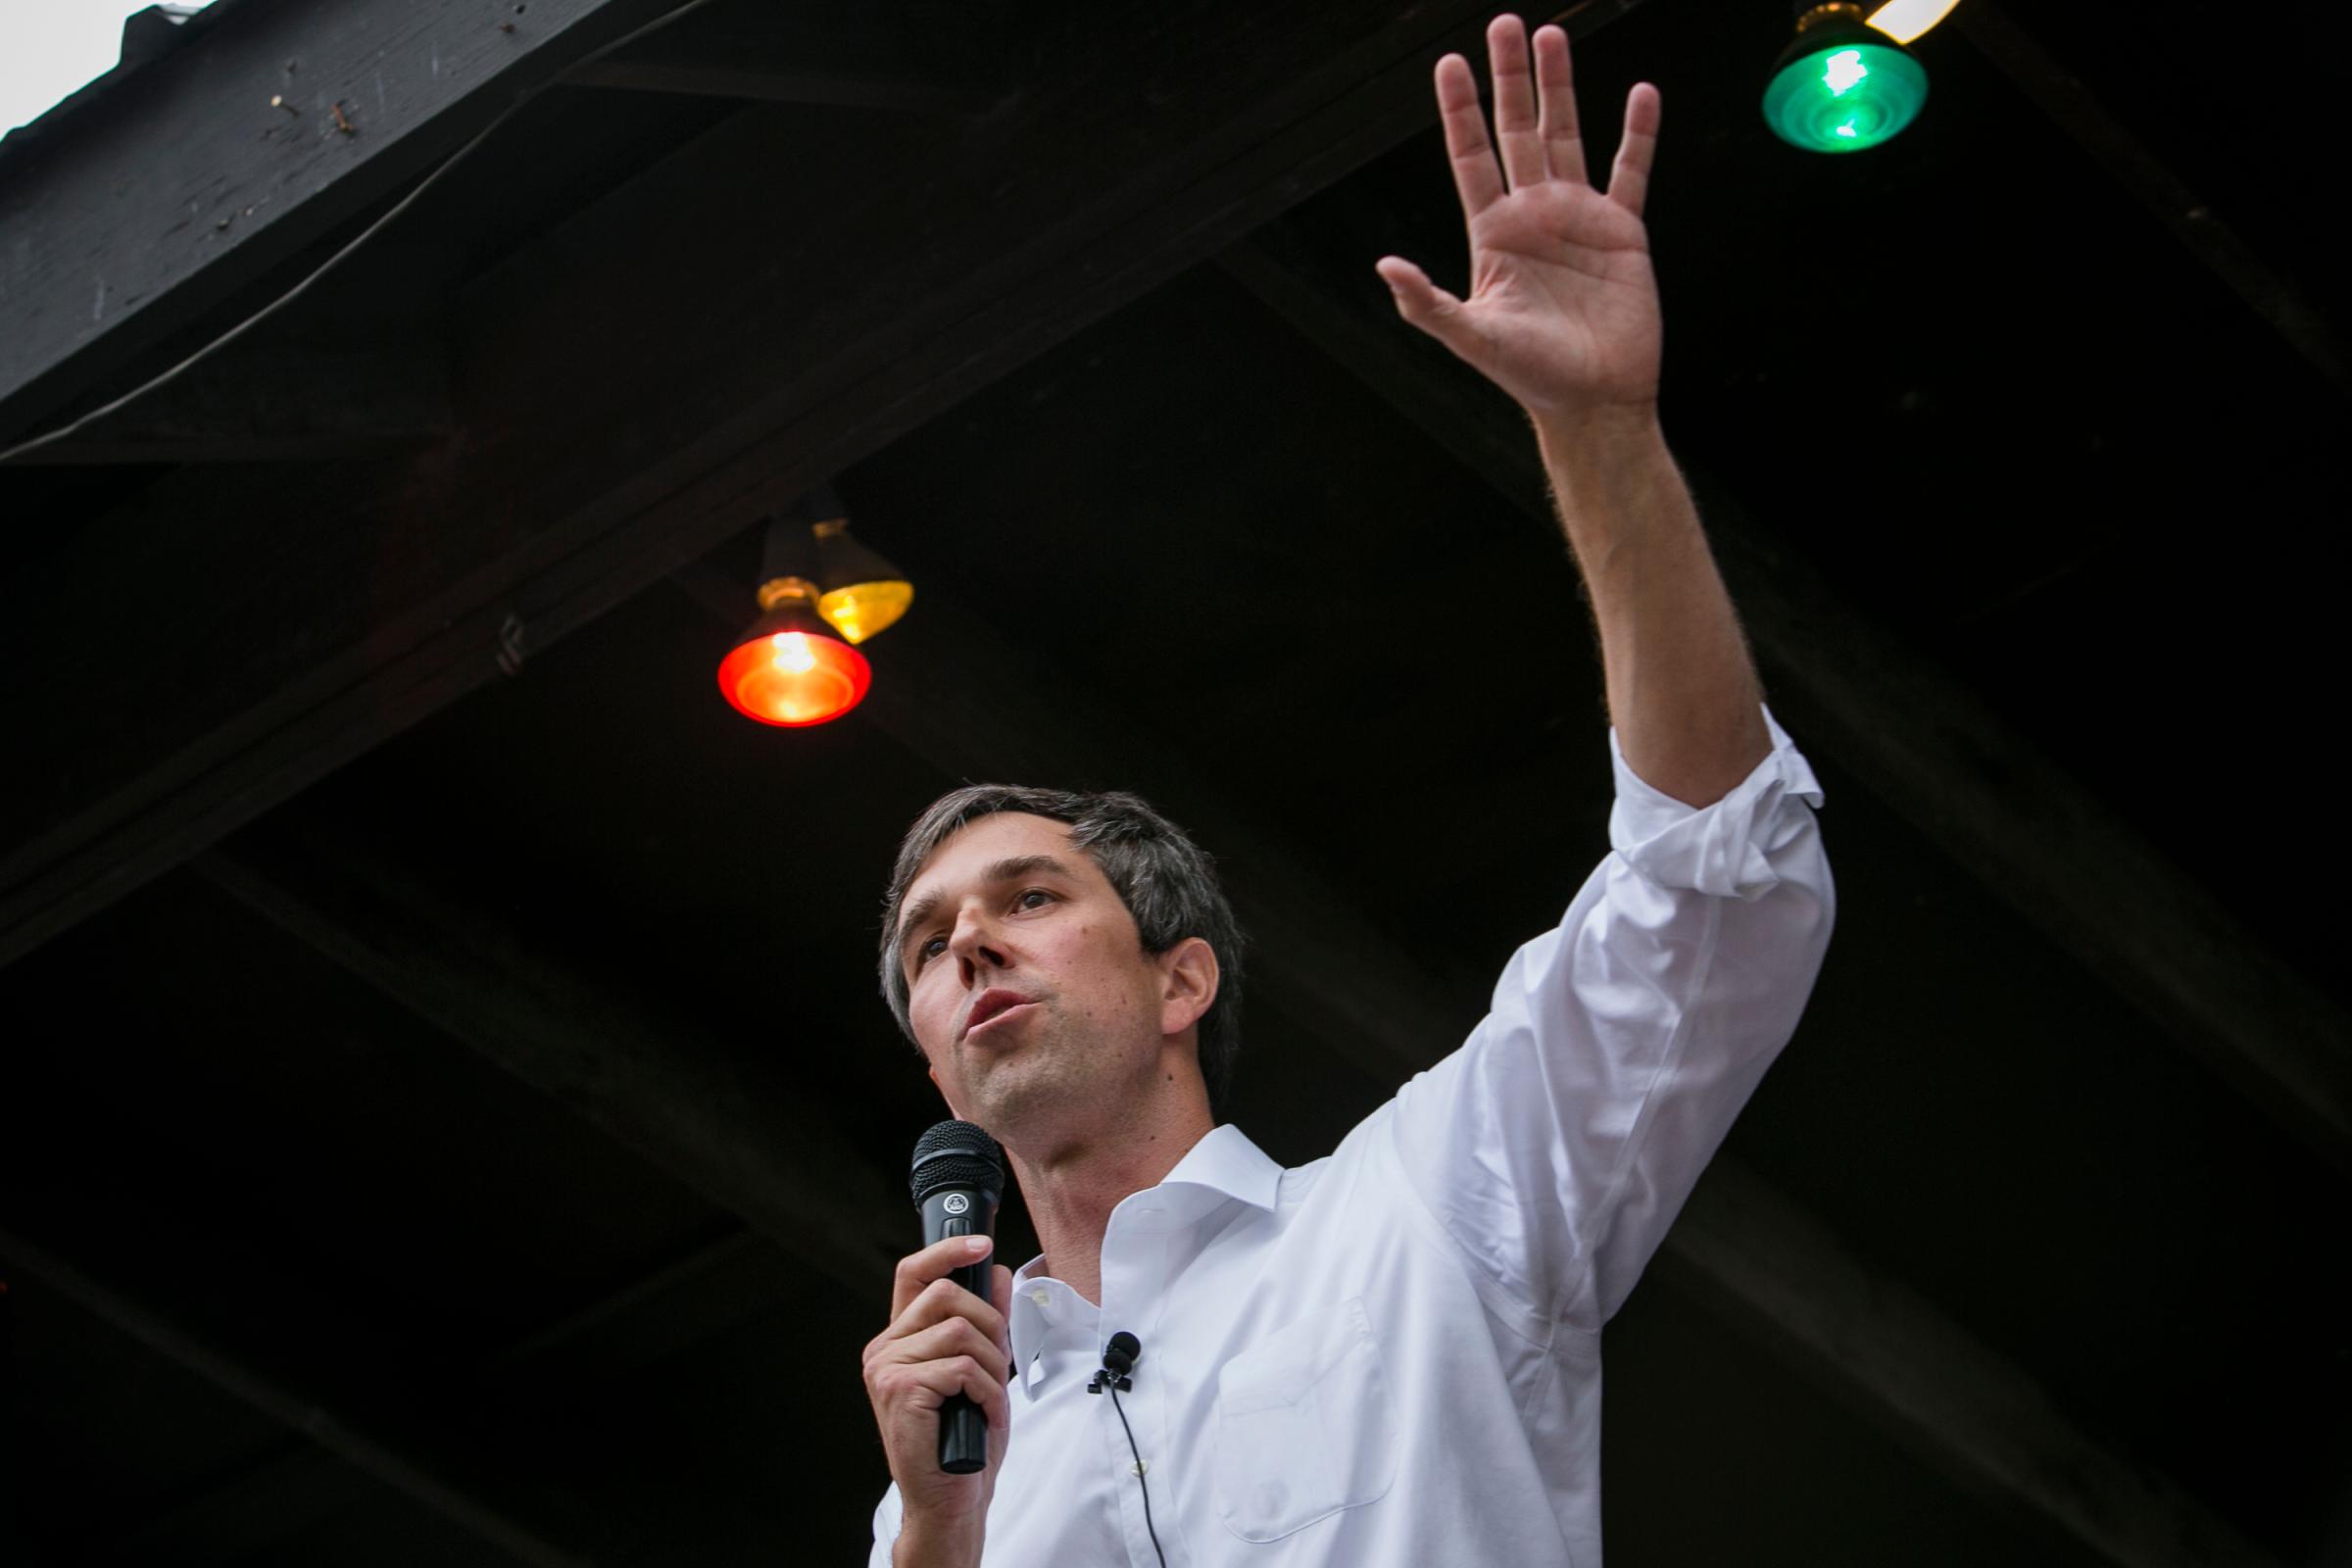 Democratic Challenger To Ted Cruz's Seat Texan Congressman Beto O'Rourke Holds Campaign Events In Austin